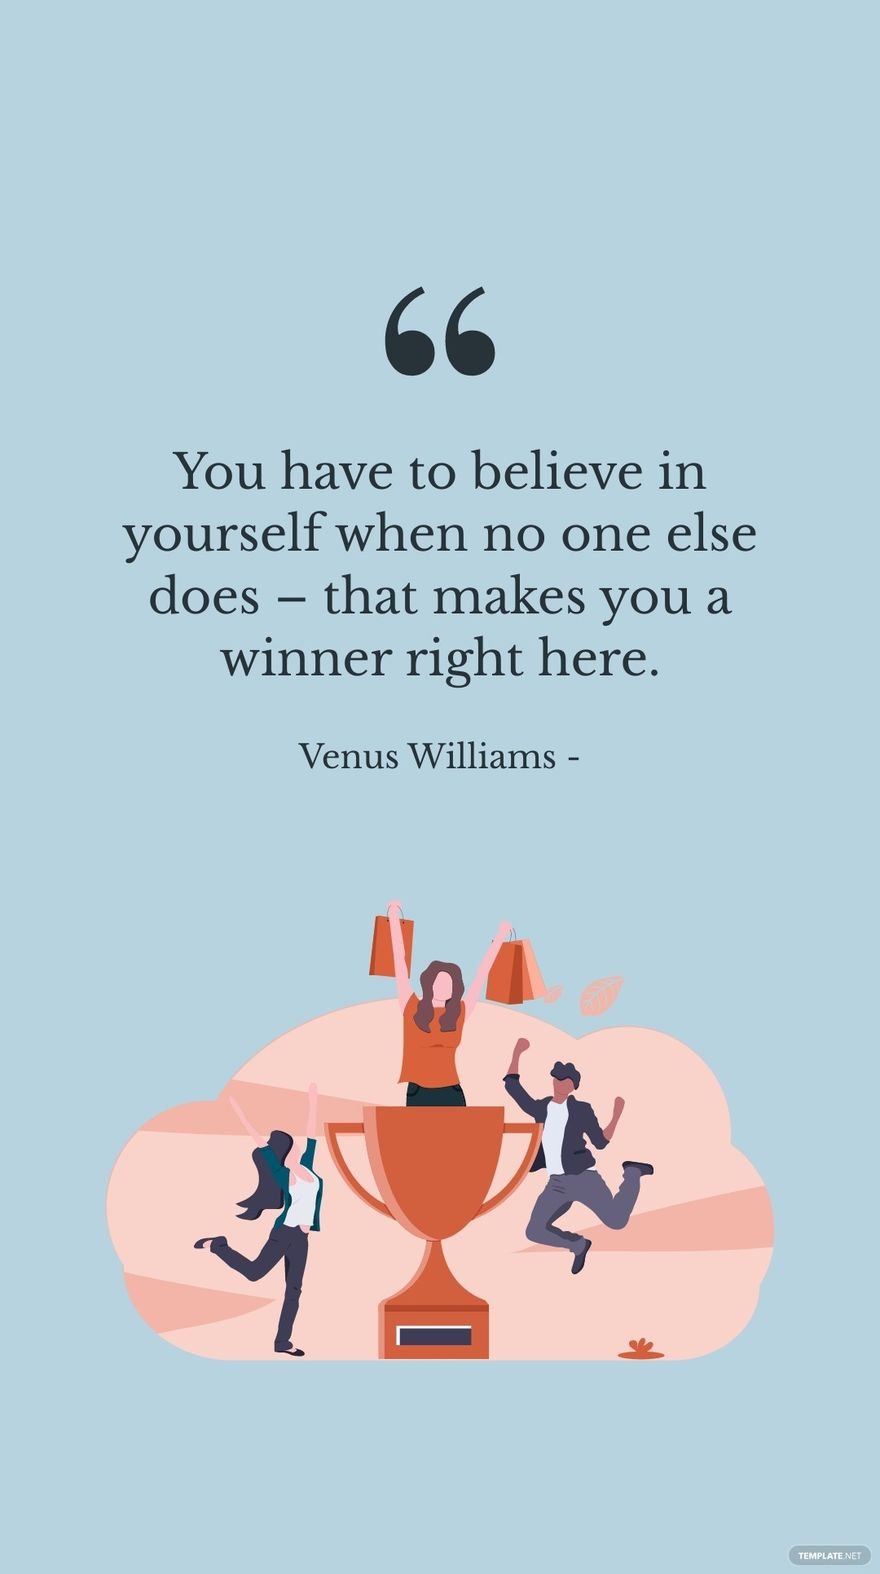 Venus Williams - You have to believe in yourself when no one else does – that makes you a winner right here.